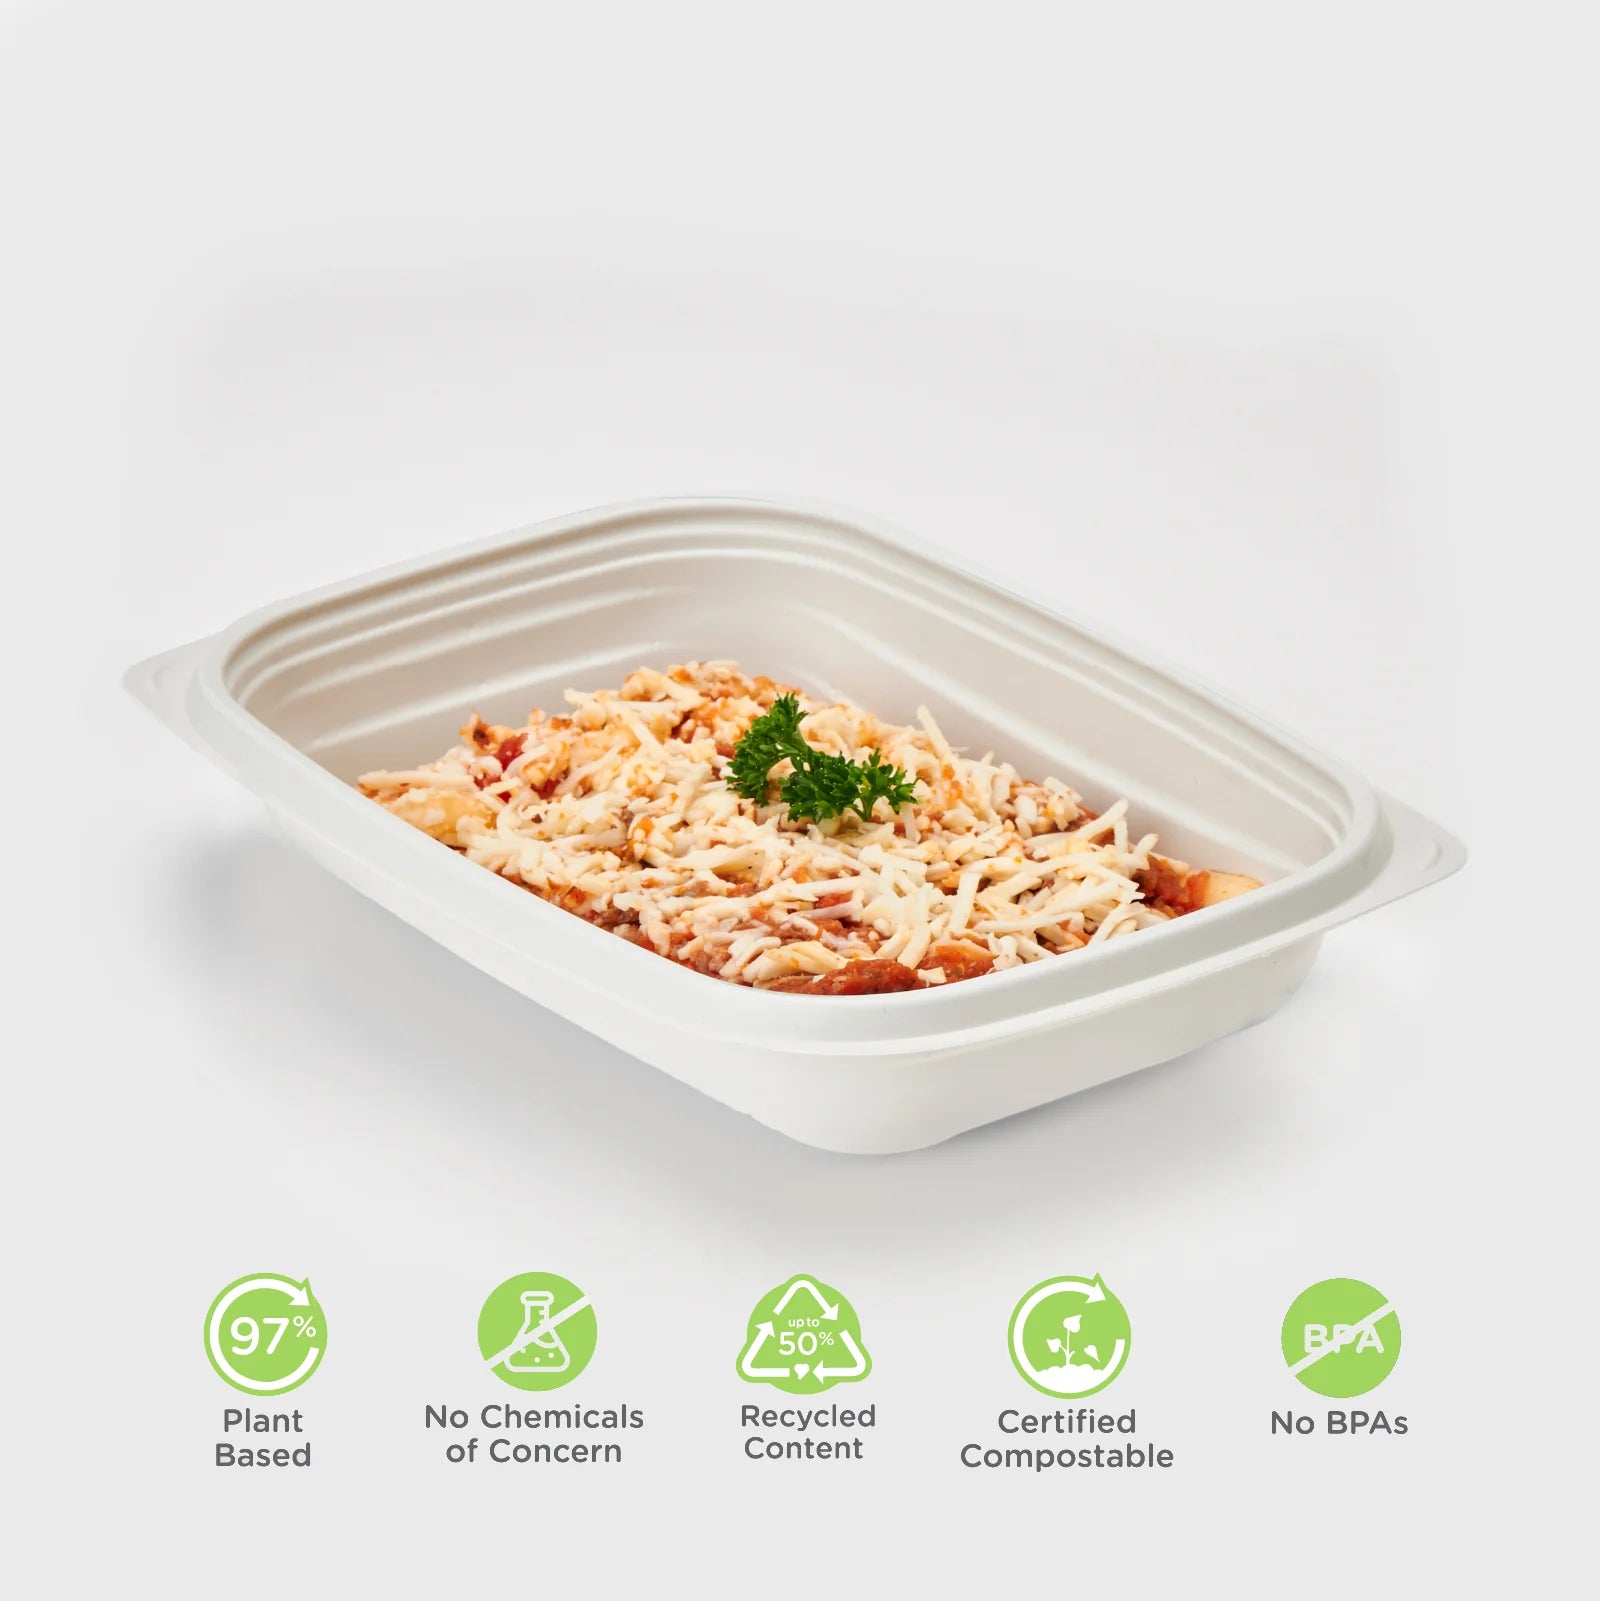 [600 Count] 24oz Eco Friendly Bowls with Lids Disposable Compostable Container - Square Bowl Sugarcane Bagasse Meal Prep Bento Boxes Take Out Catering